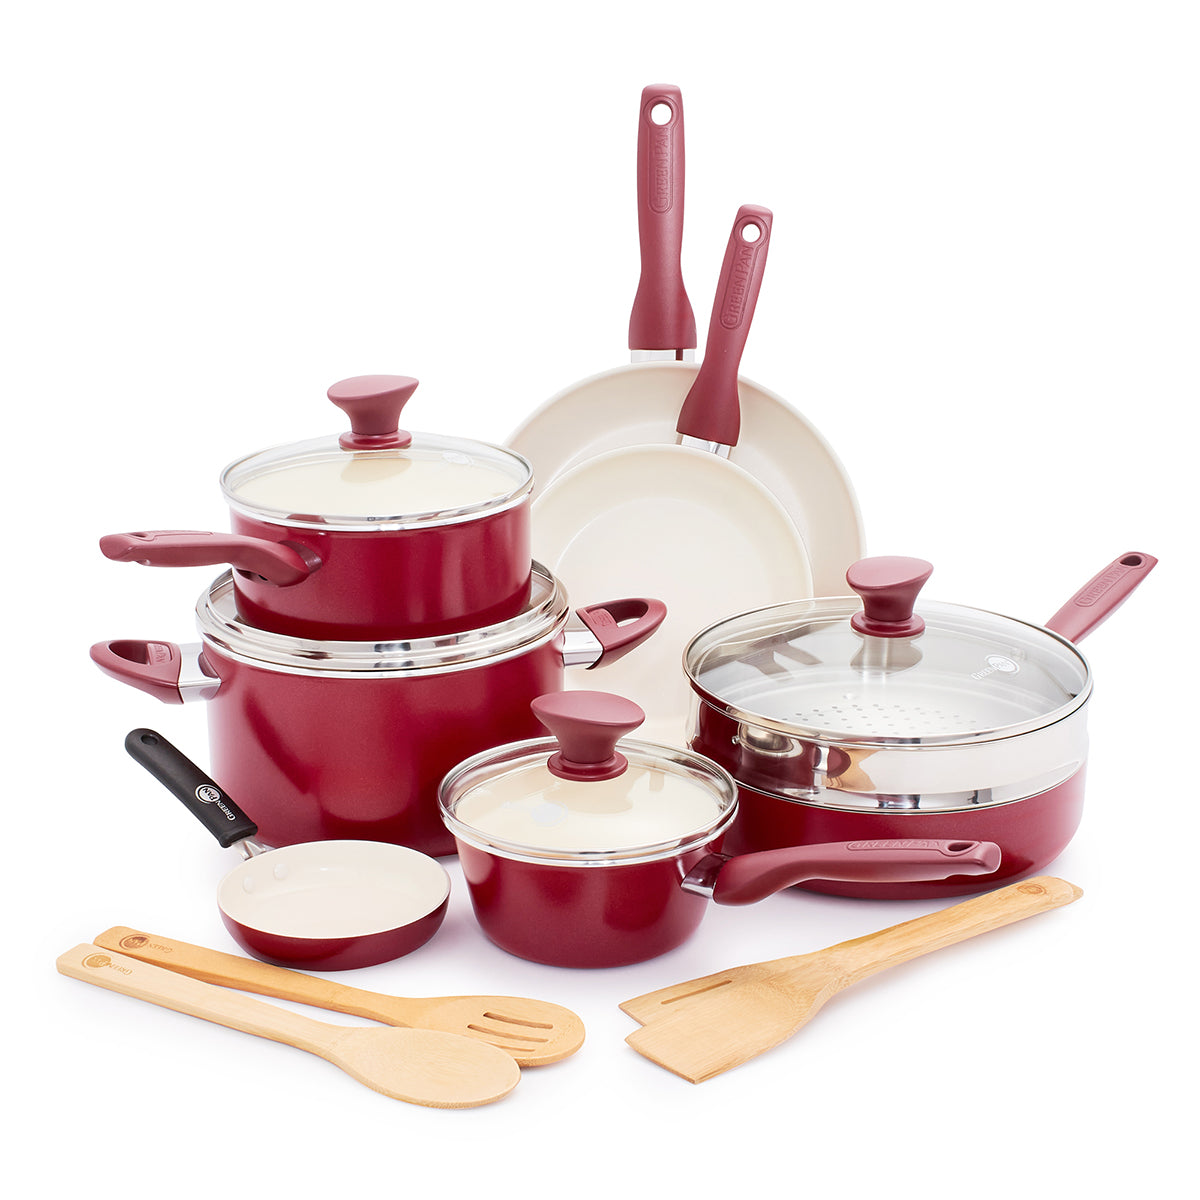 Non-stick Stainless Steel Cookware Set 18 Piece Home Kitchen Pots & Pans Set  Red